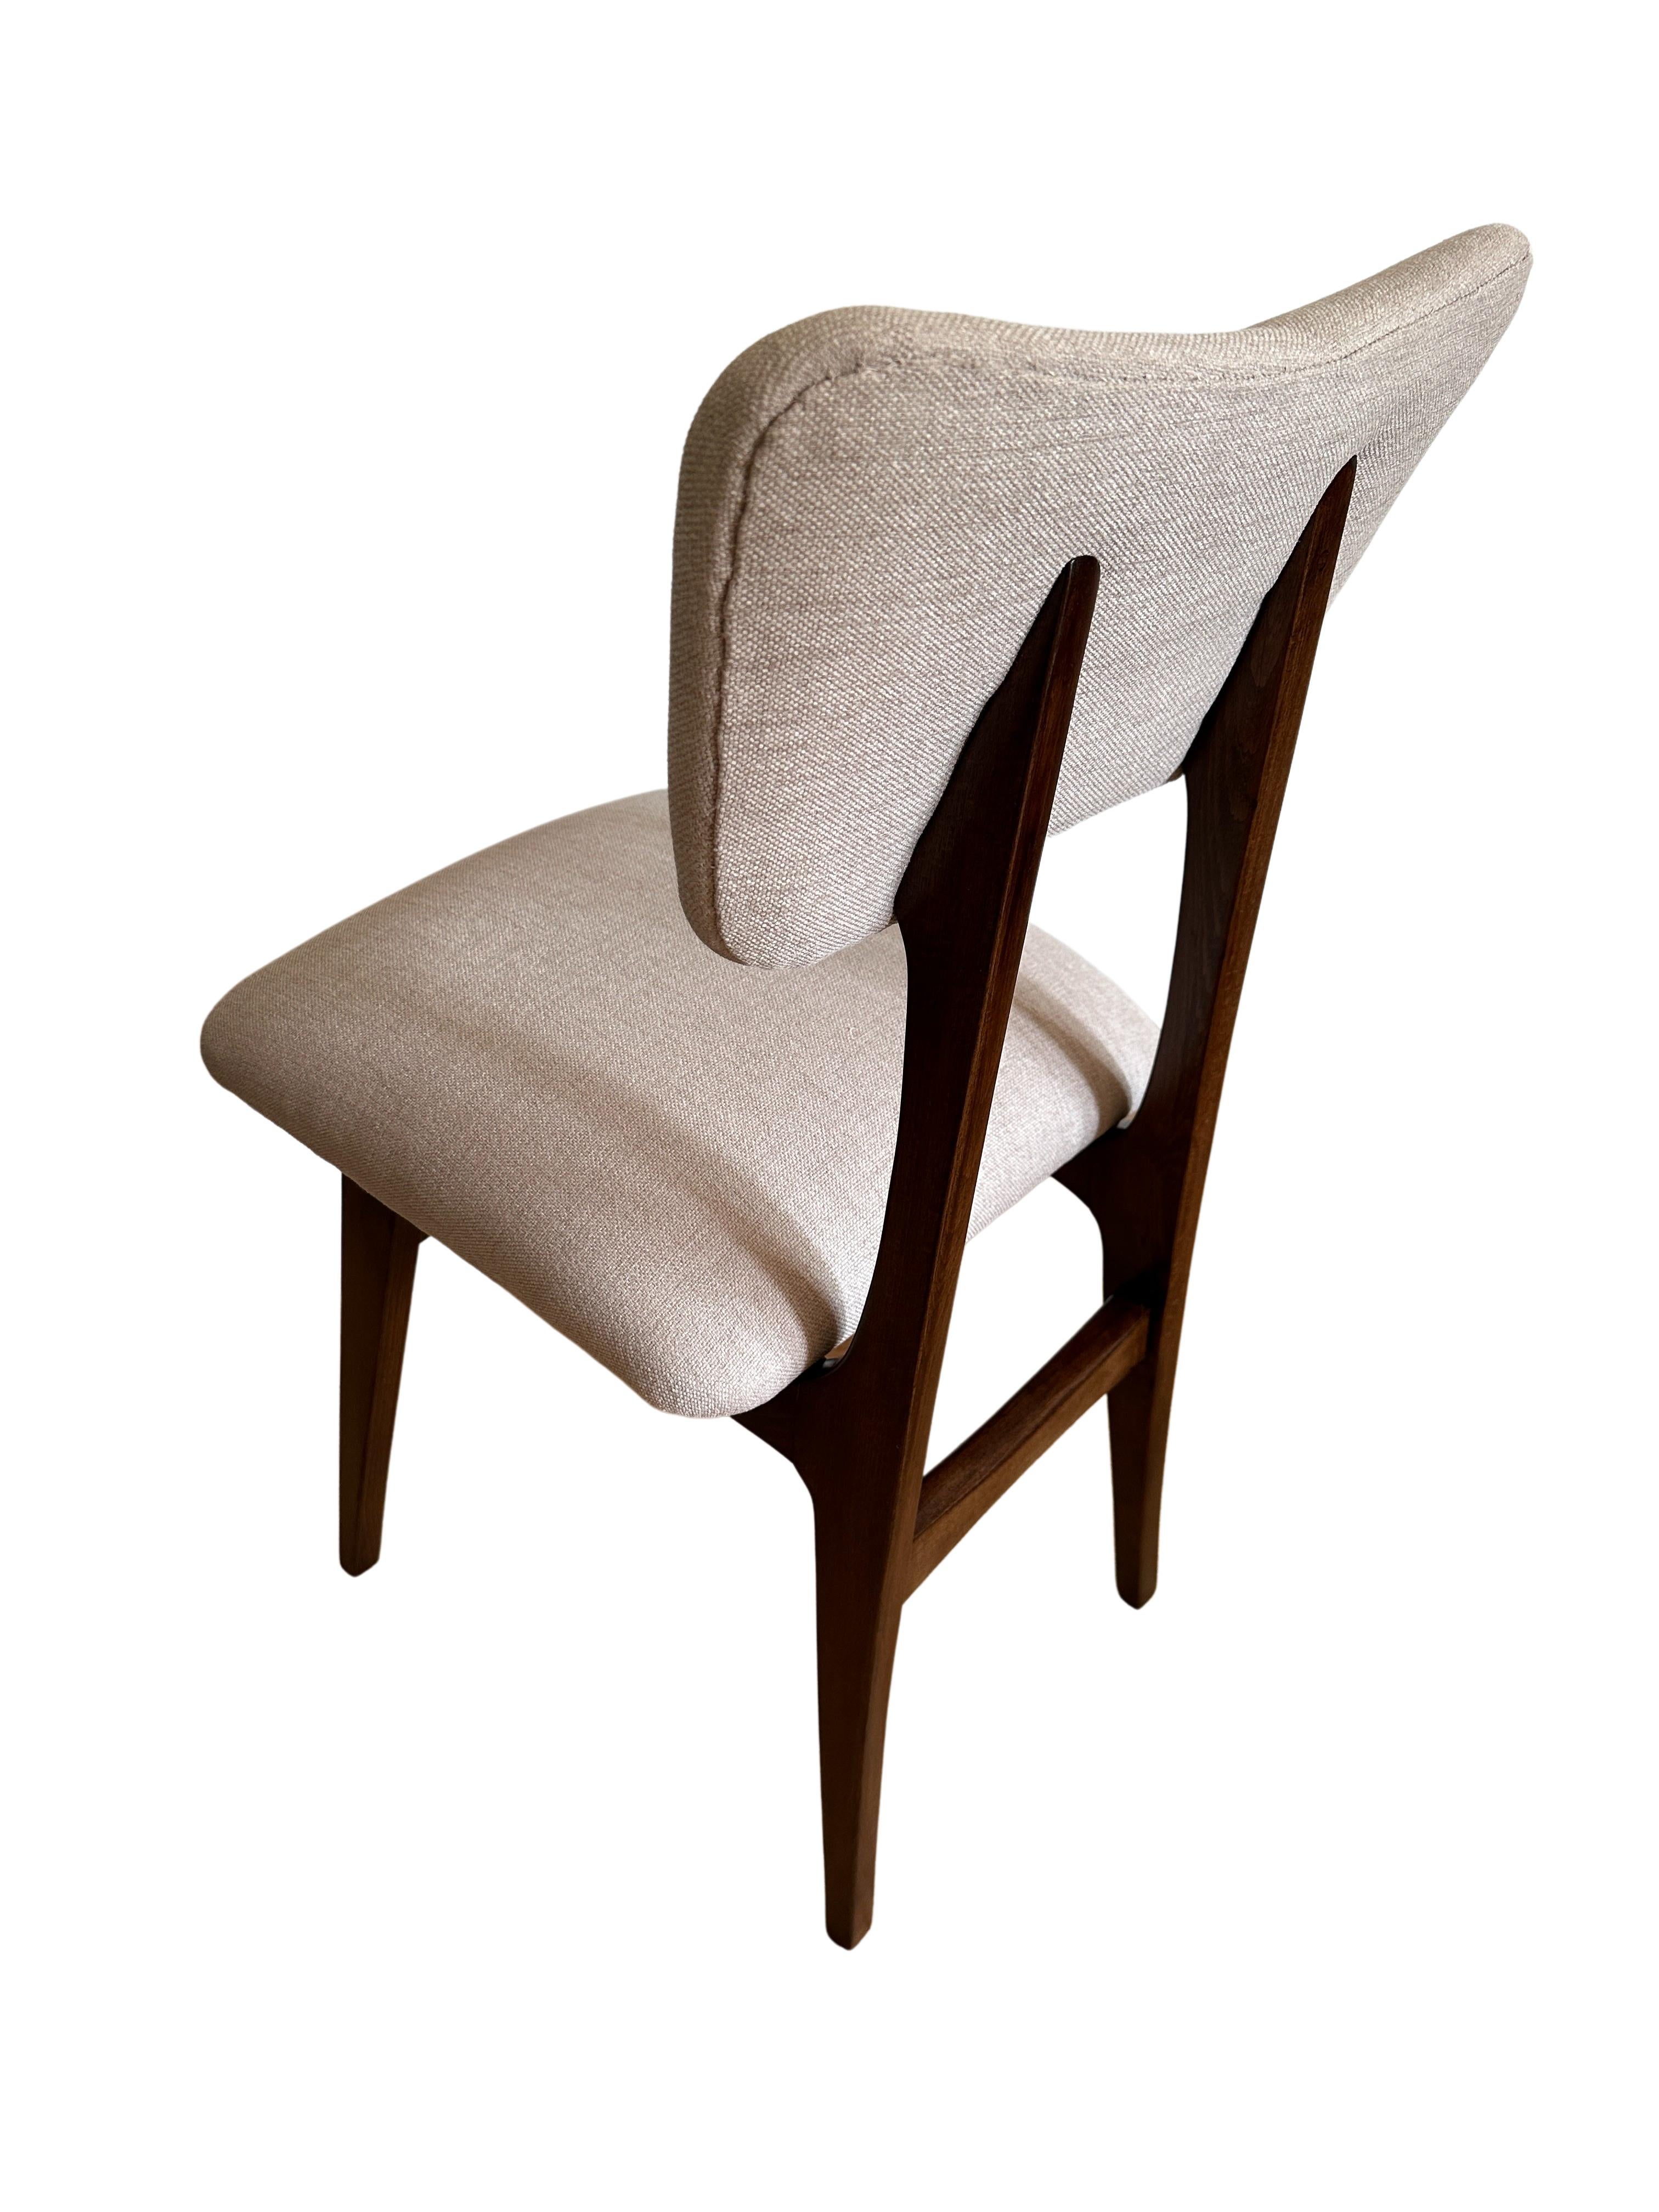 20th Century Midcentury Dining Chair in Beige, Europe, 1960s For Sale